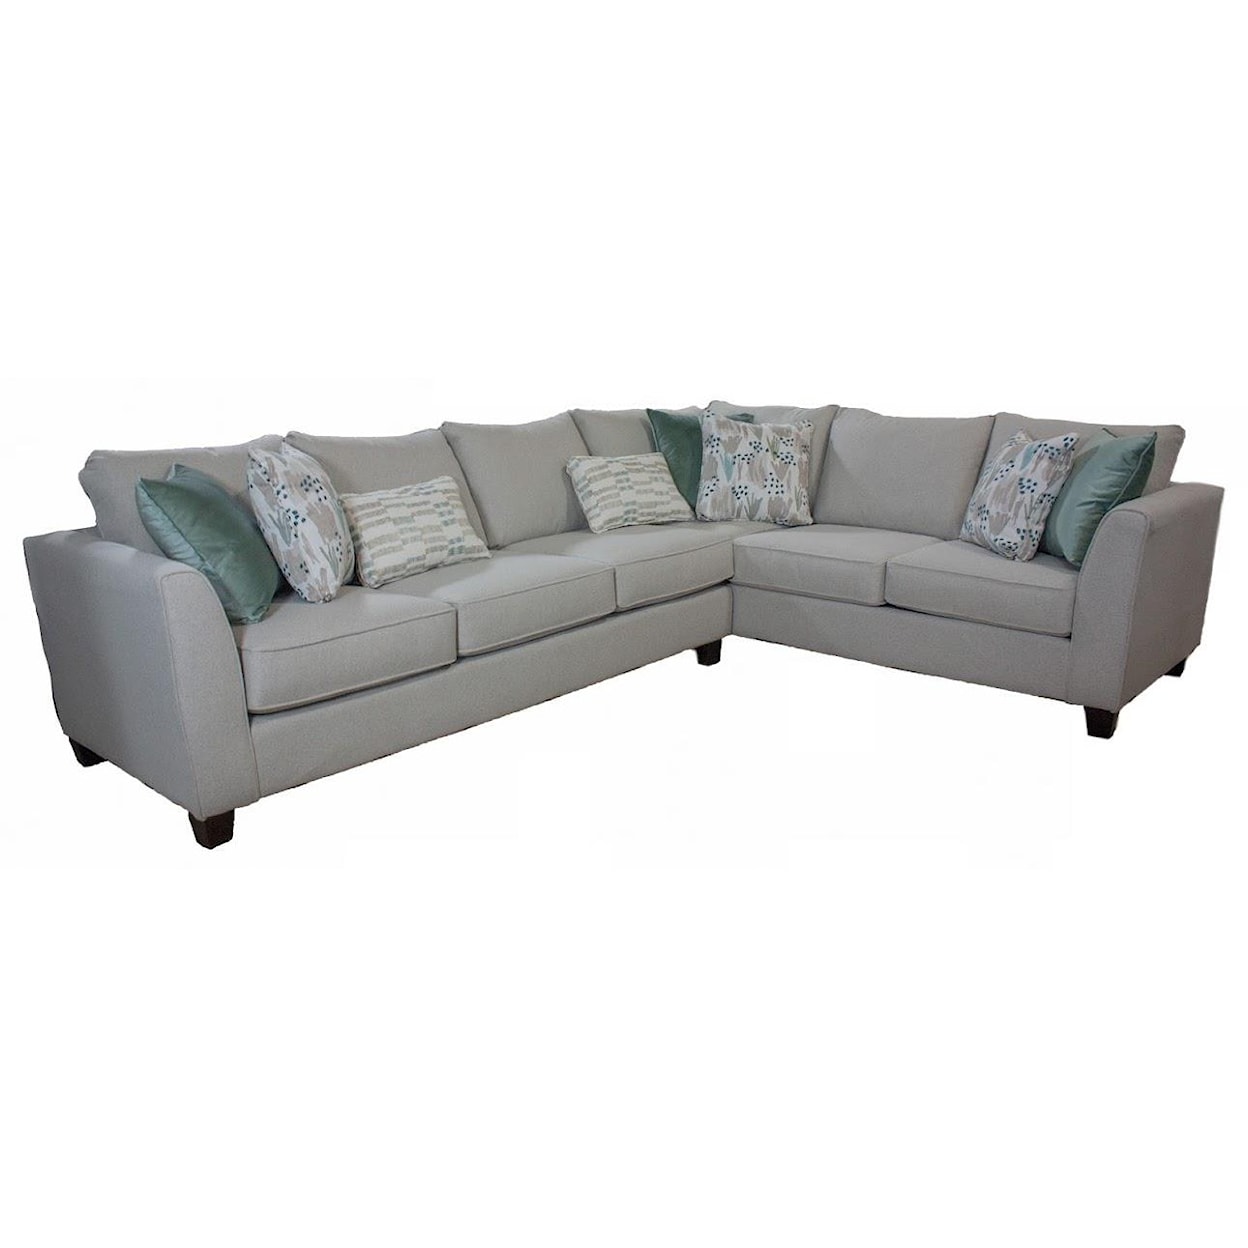 Fusion Furniture 28 WENDY LINEN 2 Seat Sectional